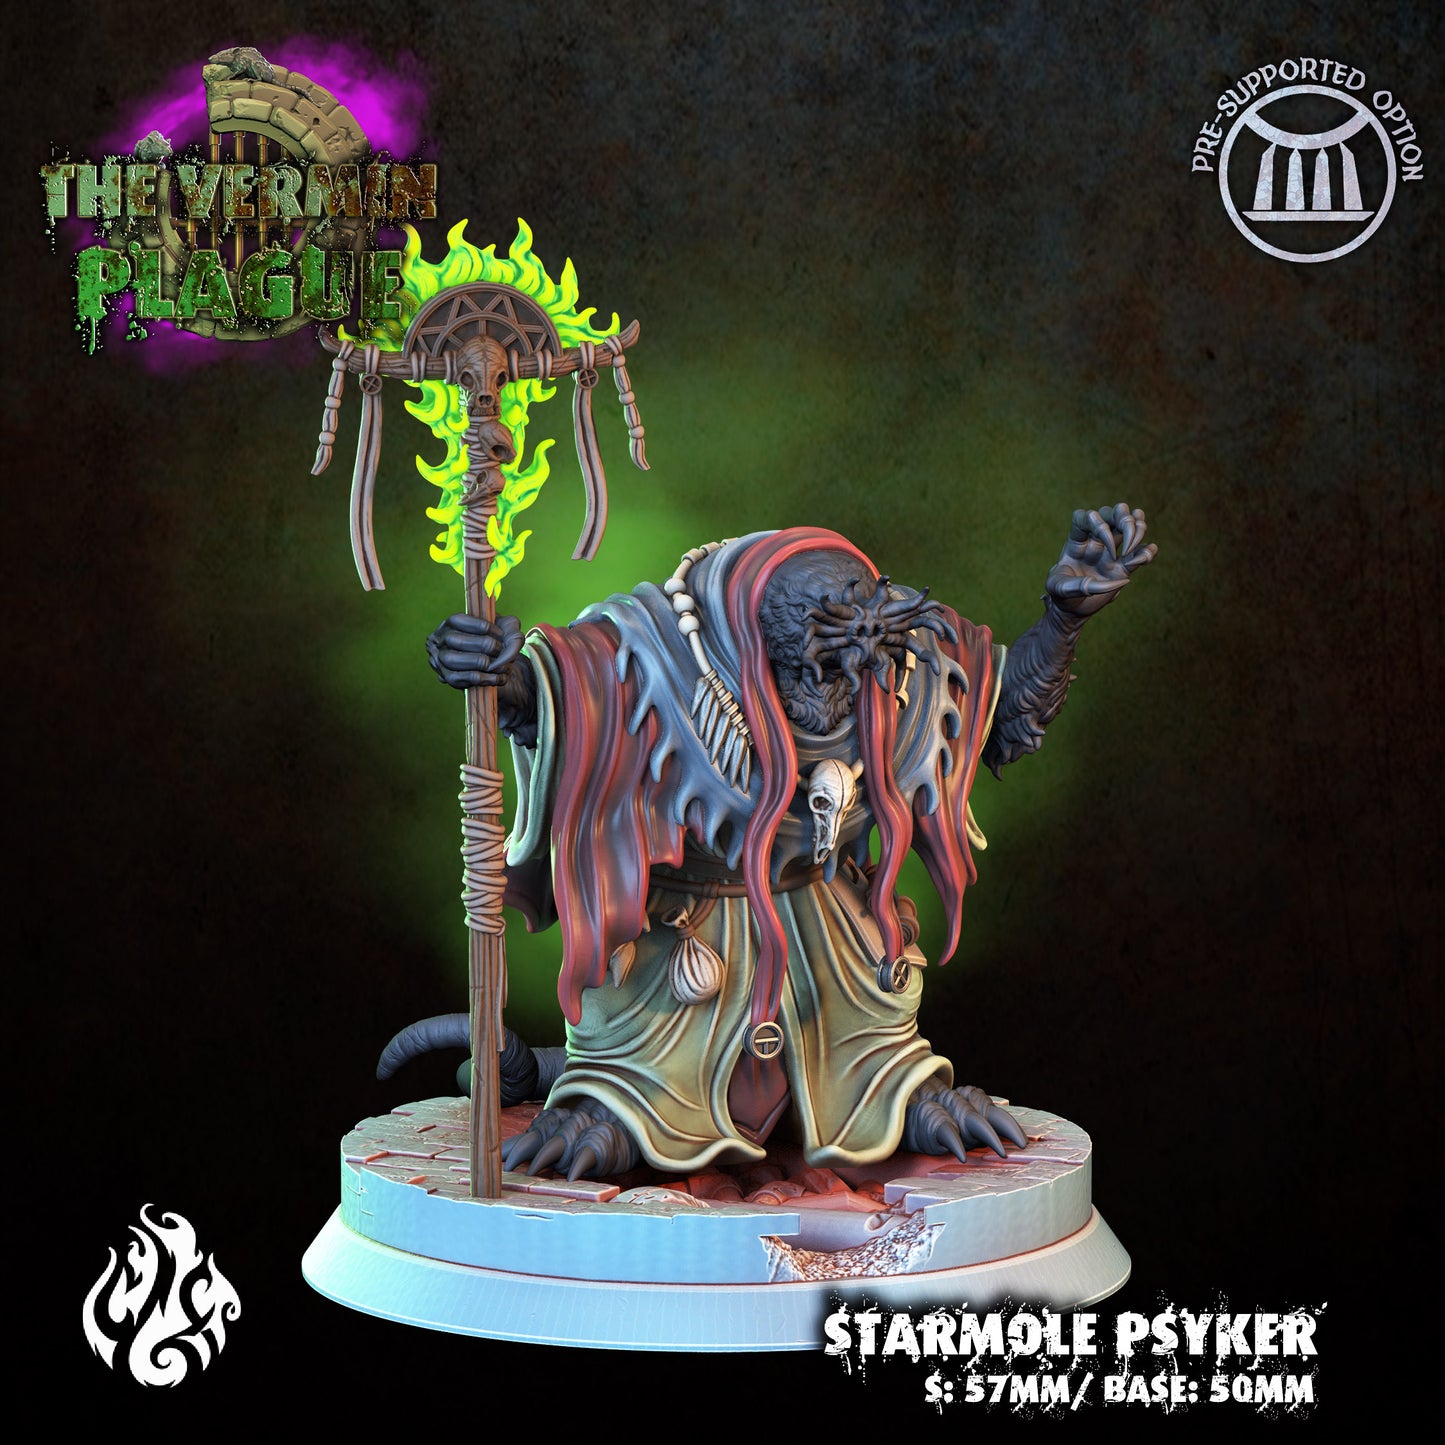 Starmole Psyker The Vermin Plague Series from Crippled God Foundry - Table-top gaming mini and collectable for painting.